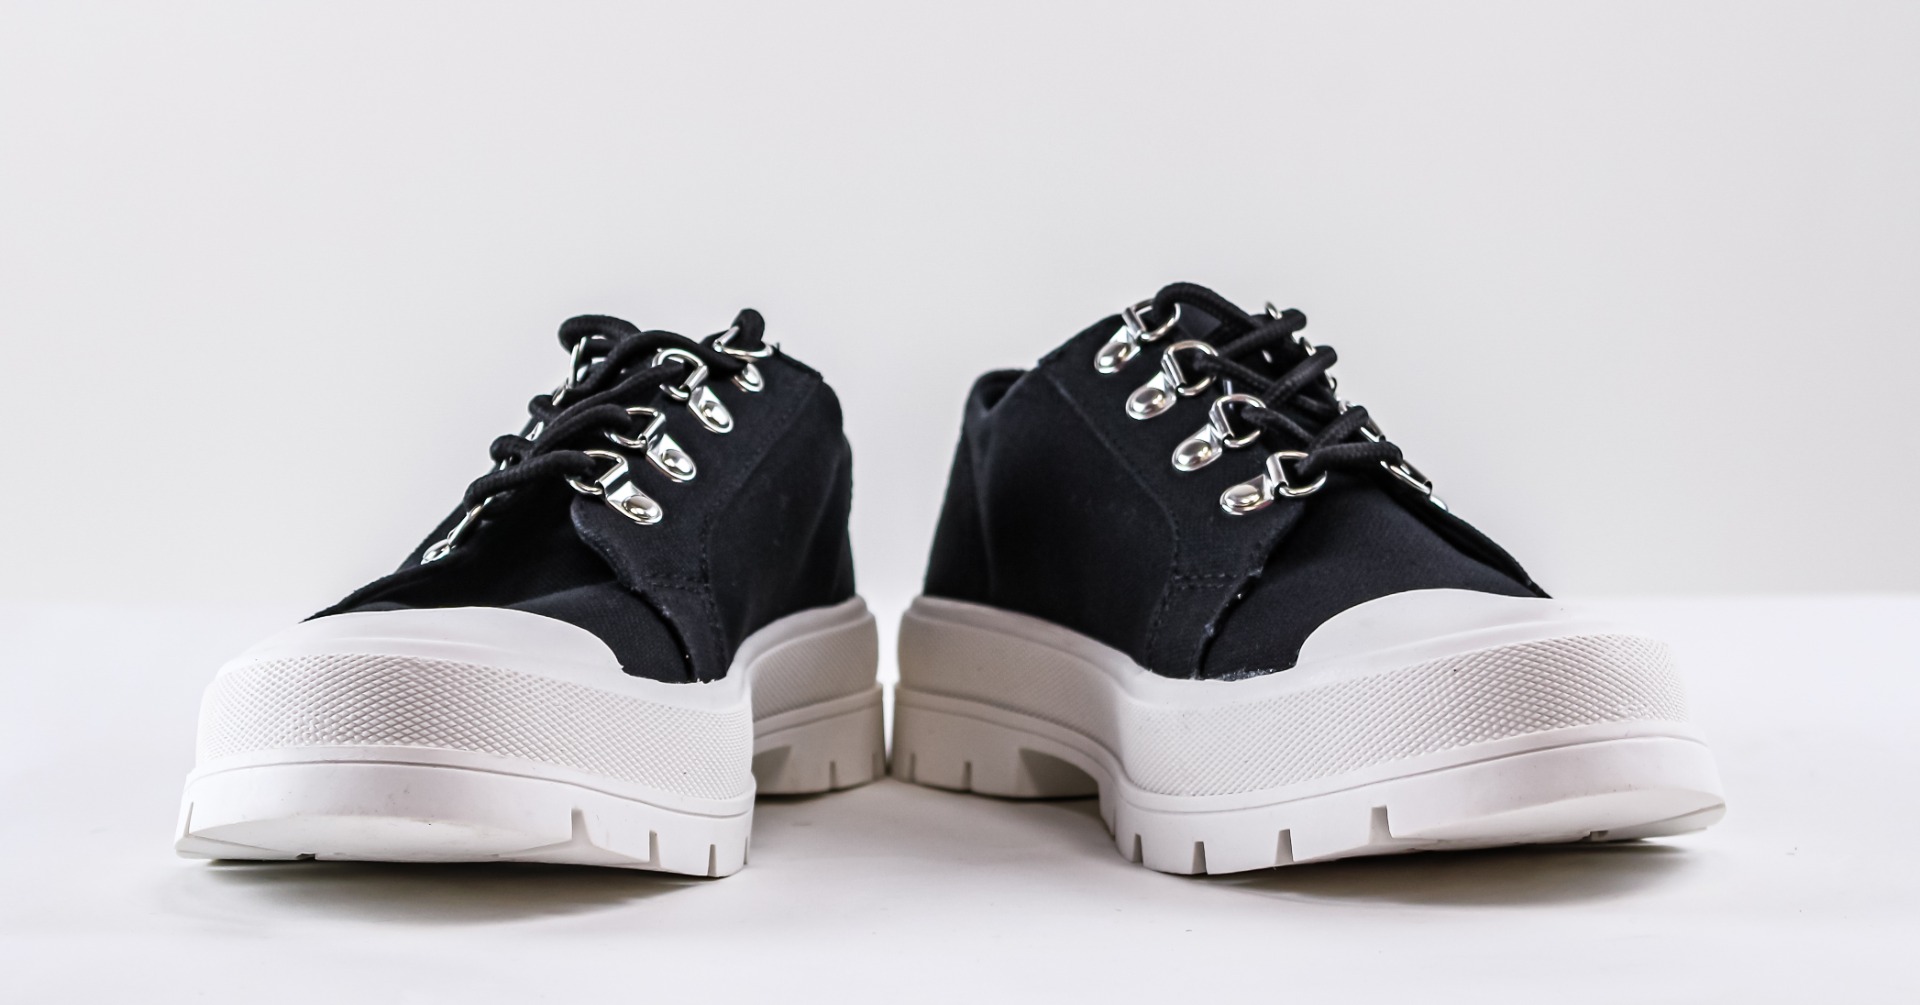 Canvas Upper Lug Sole Sneakers